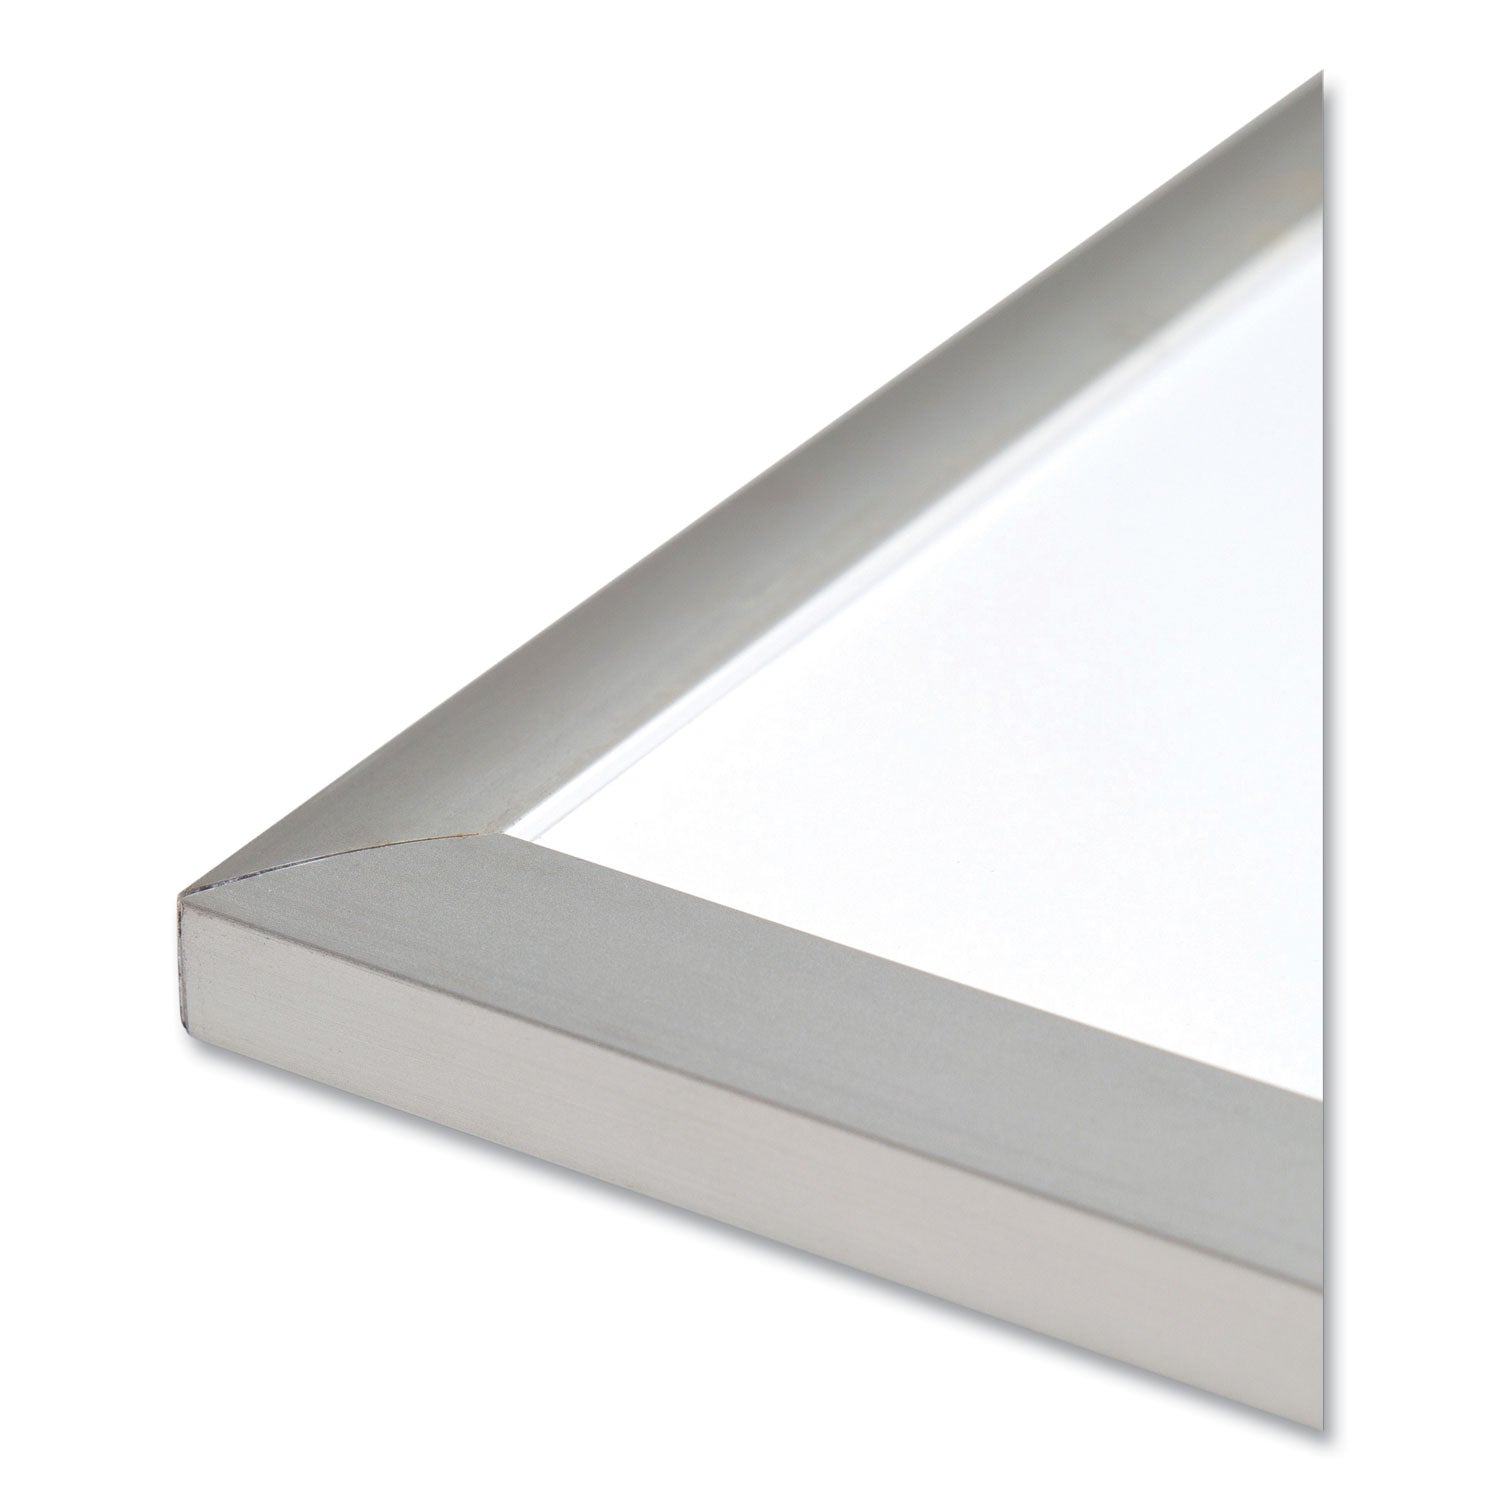 magnetic-dry-erase-board-with-aluminum-frame-47-x-35-white-surface-silver-frame_ubr072u0001 - 2